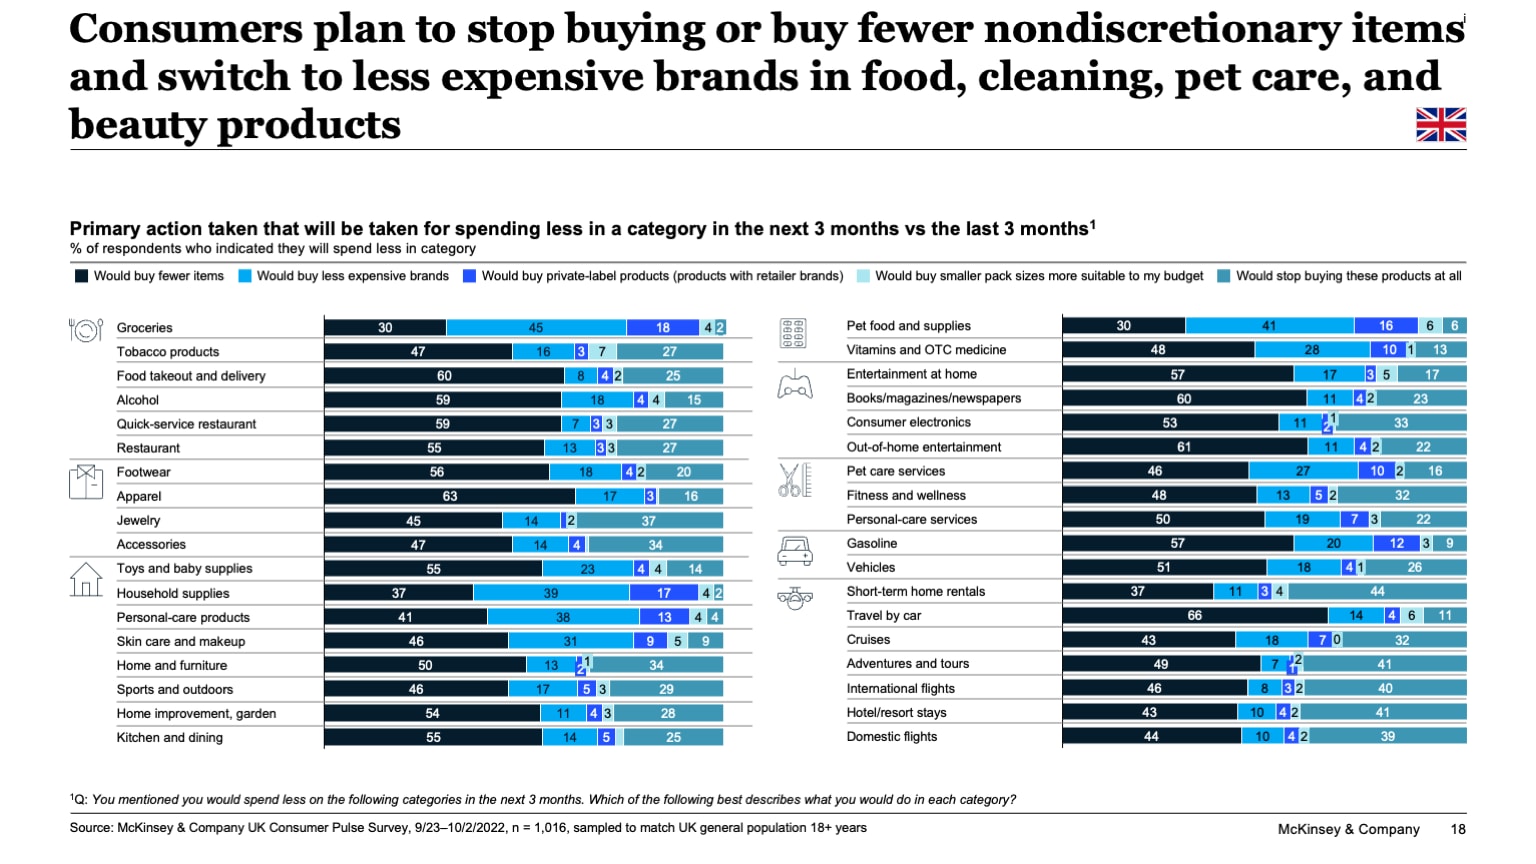 Consumers plan to stop buying or buy fewer nondiscretionary items and switch to less expensive brands in food, cleaning, pet care, and beauty products